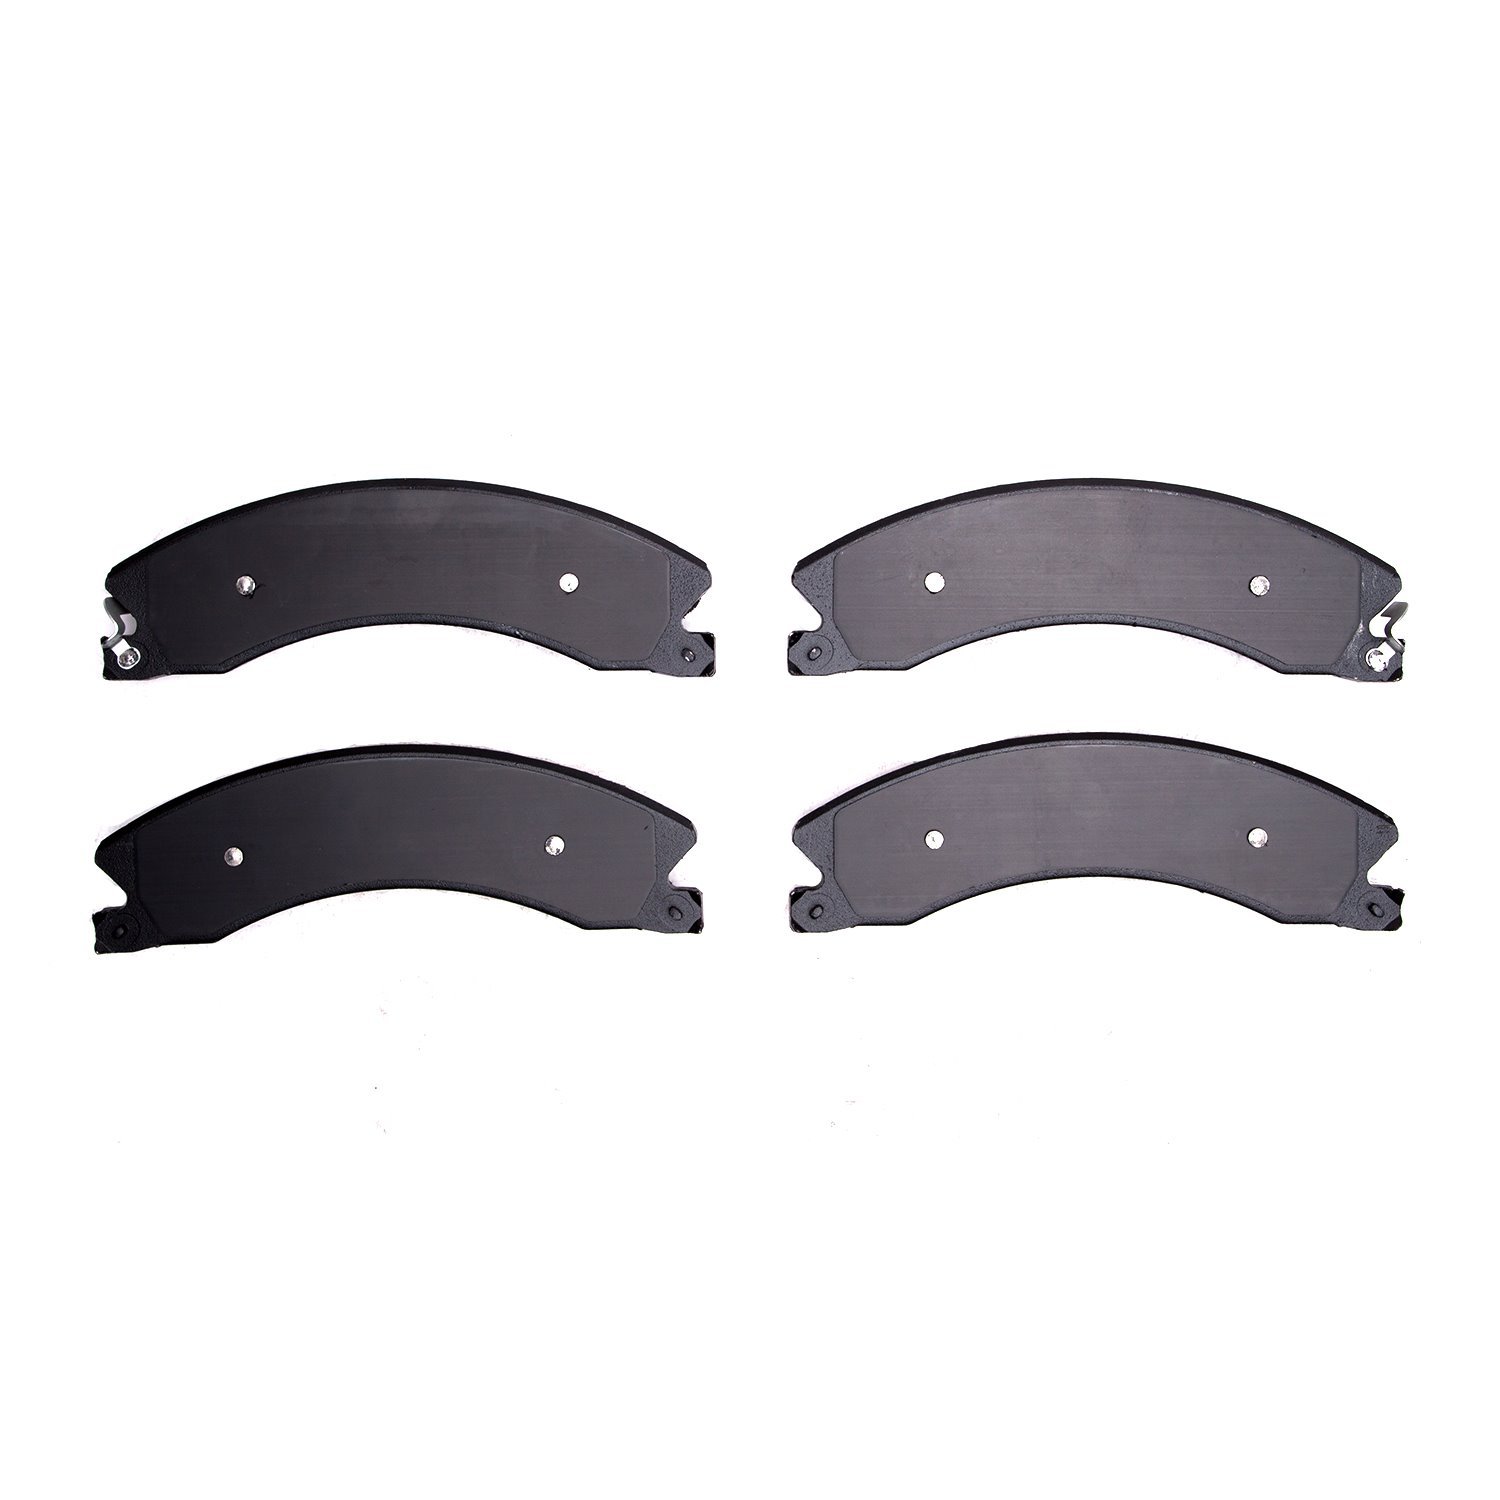 1311-1565-00 3000-Series Semi-Metallic Brake Pads, Fits Select Multiple Makes/Models, Position: Rear,Front,Fr,Rr